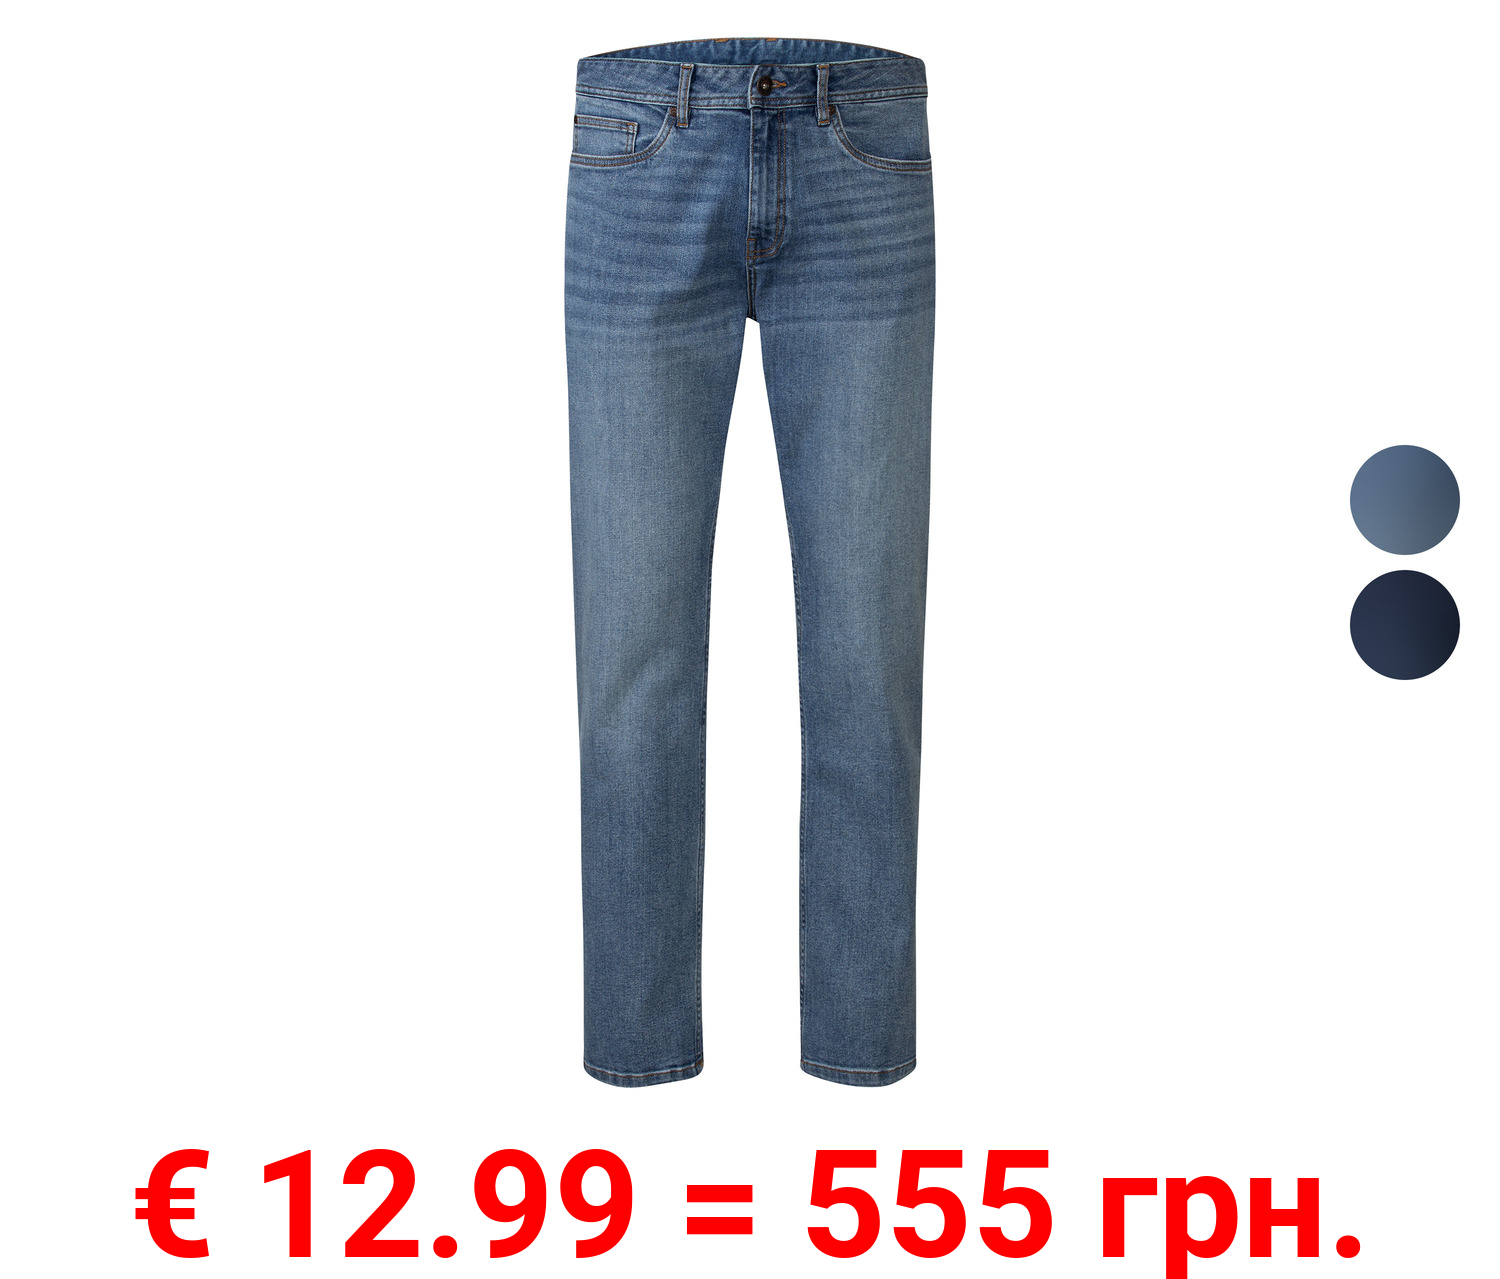 LIVERGY® Herren Jeans, Relaxed Fit, normale Leibhöhe